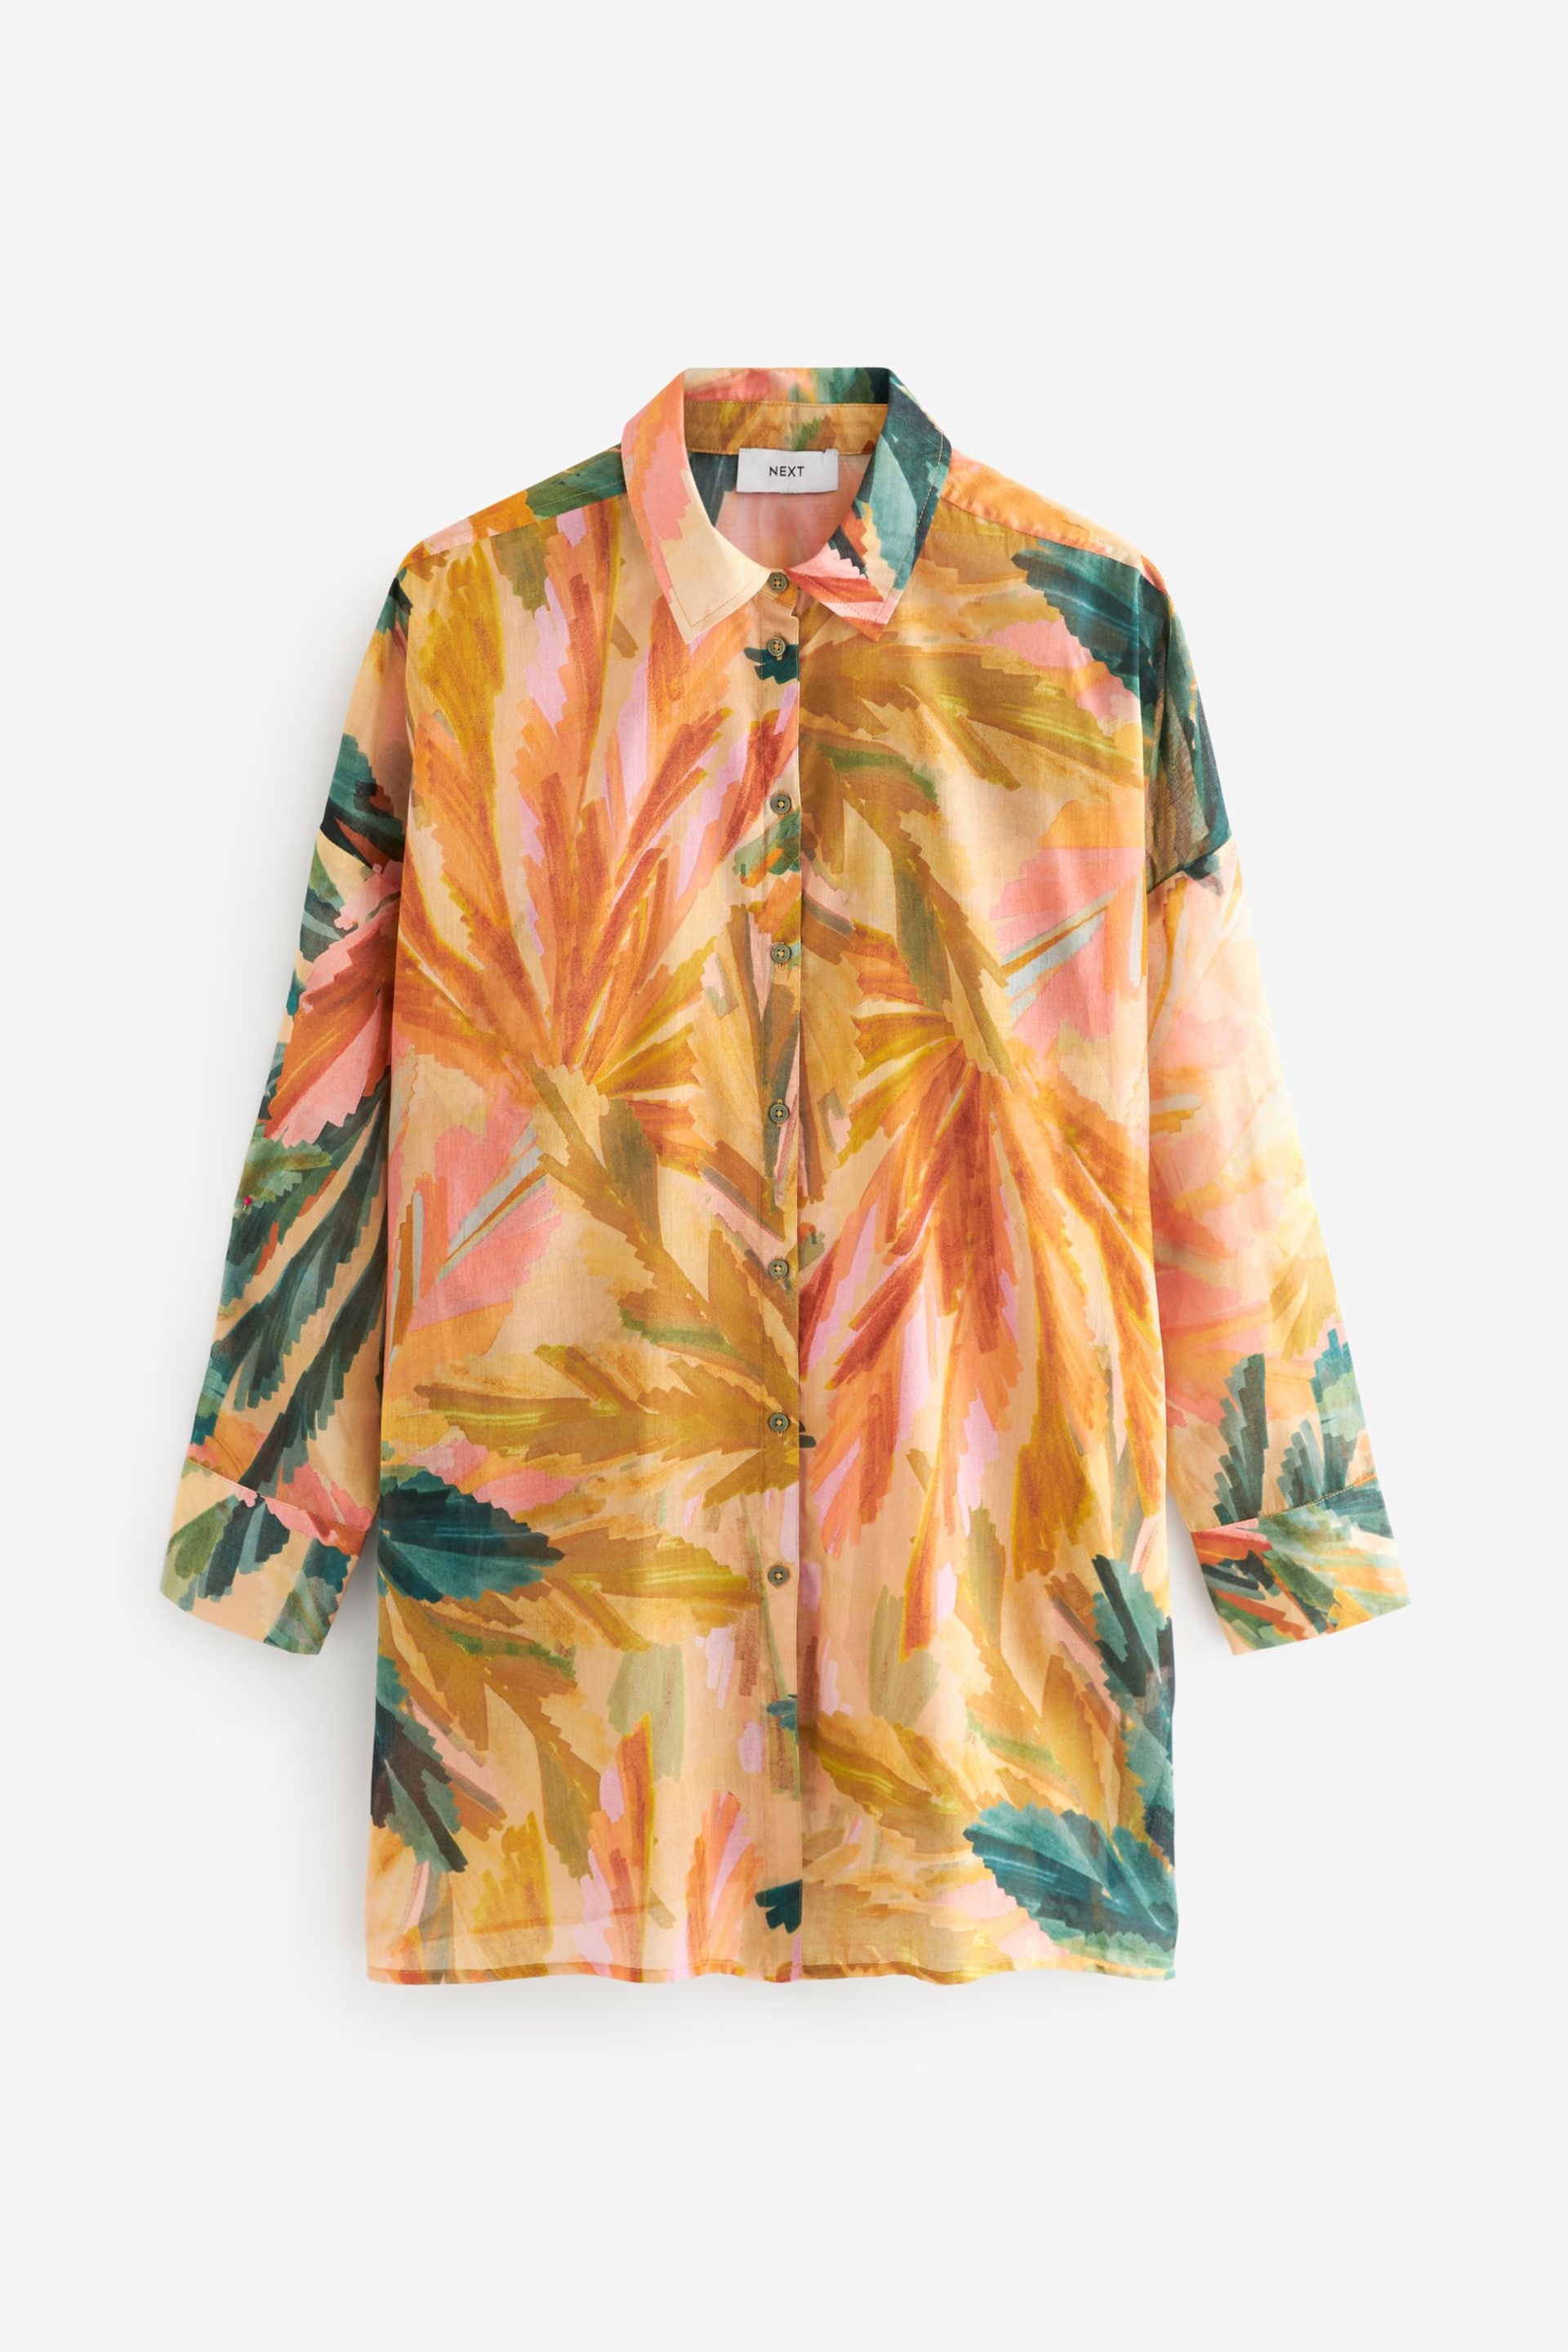 Coral/Pink Tropical Beach Shirt Cover-Up - Image 6 of 7